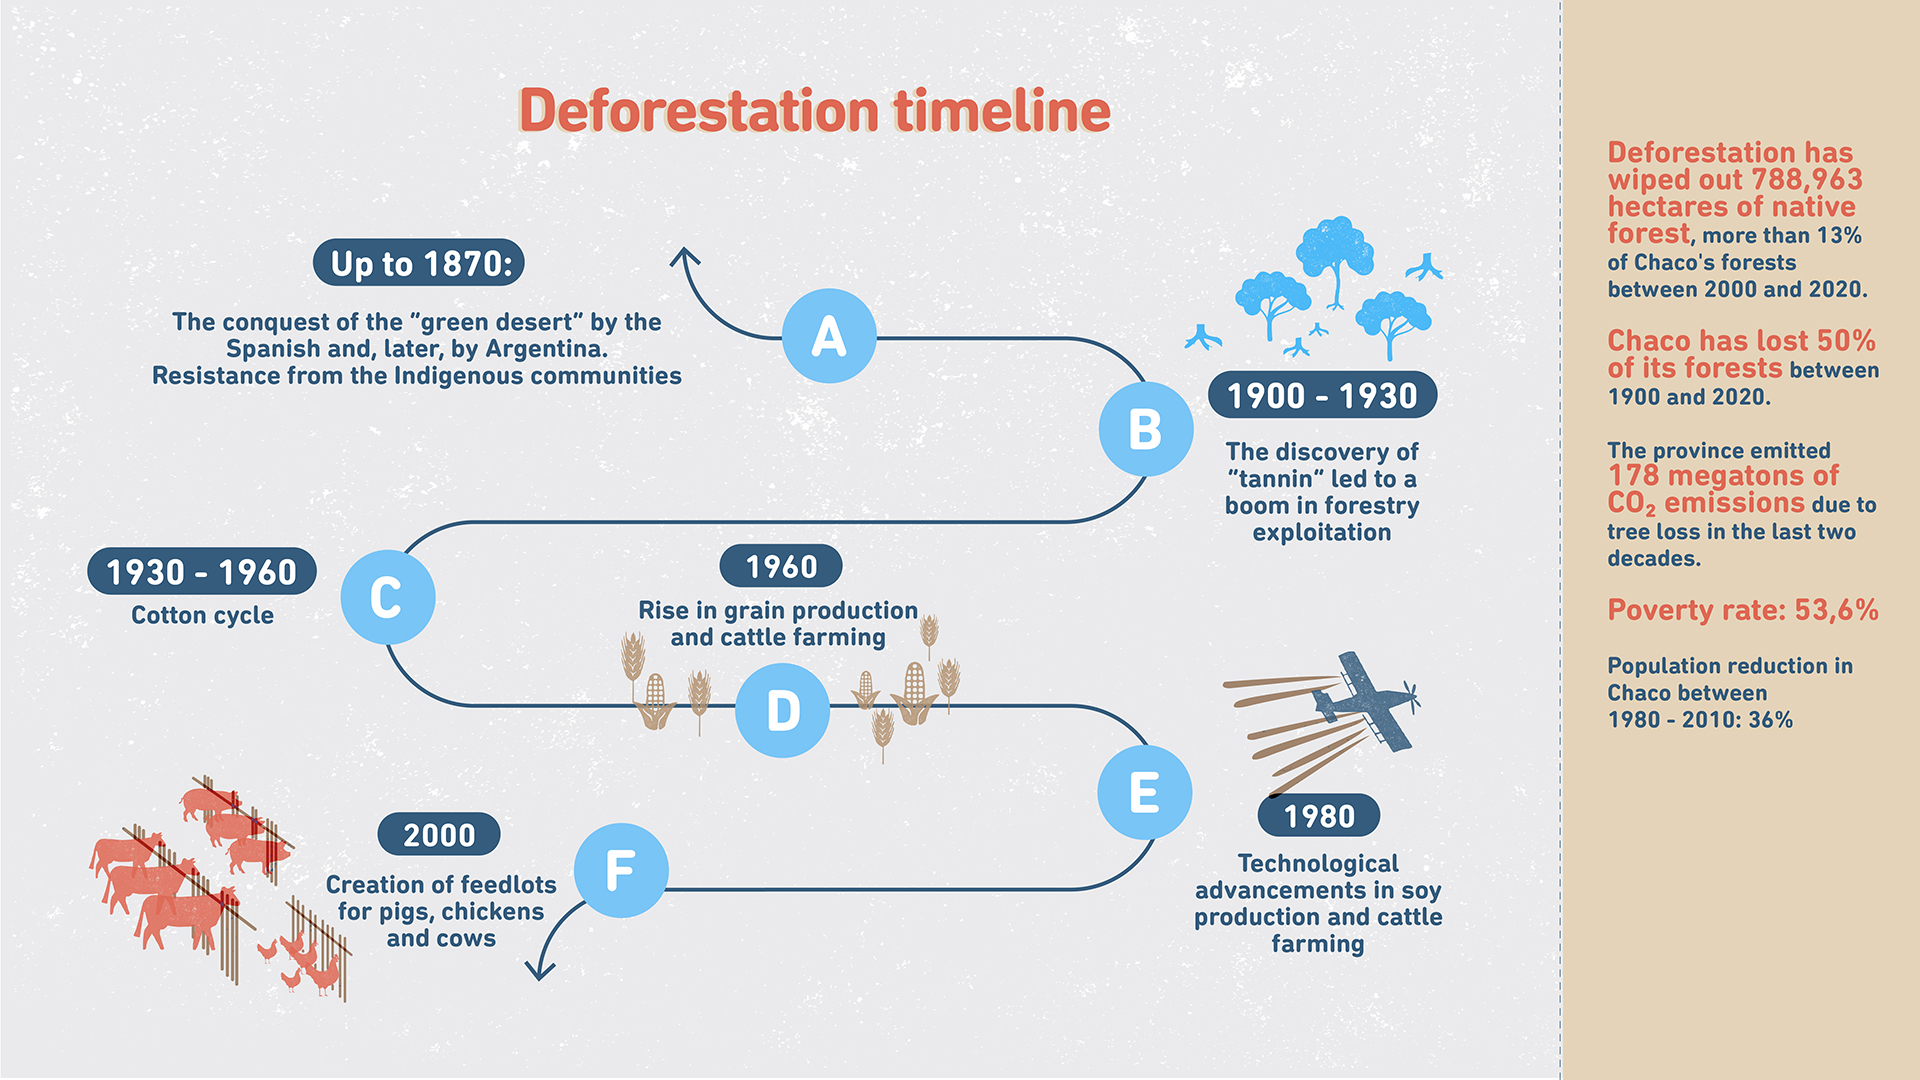 infographic showing timeline of deforestation in Chaco